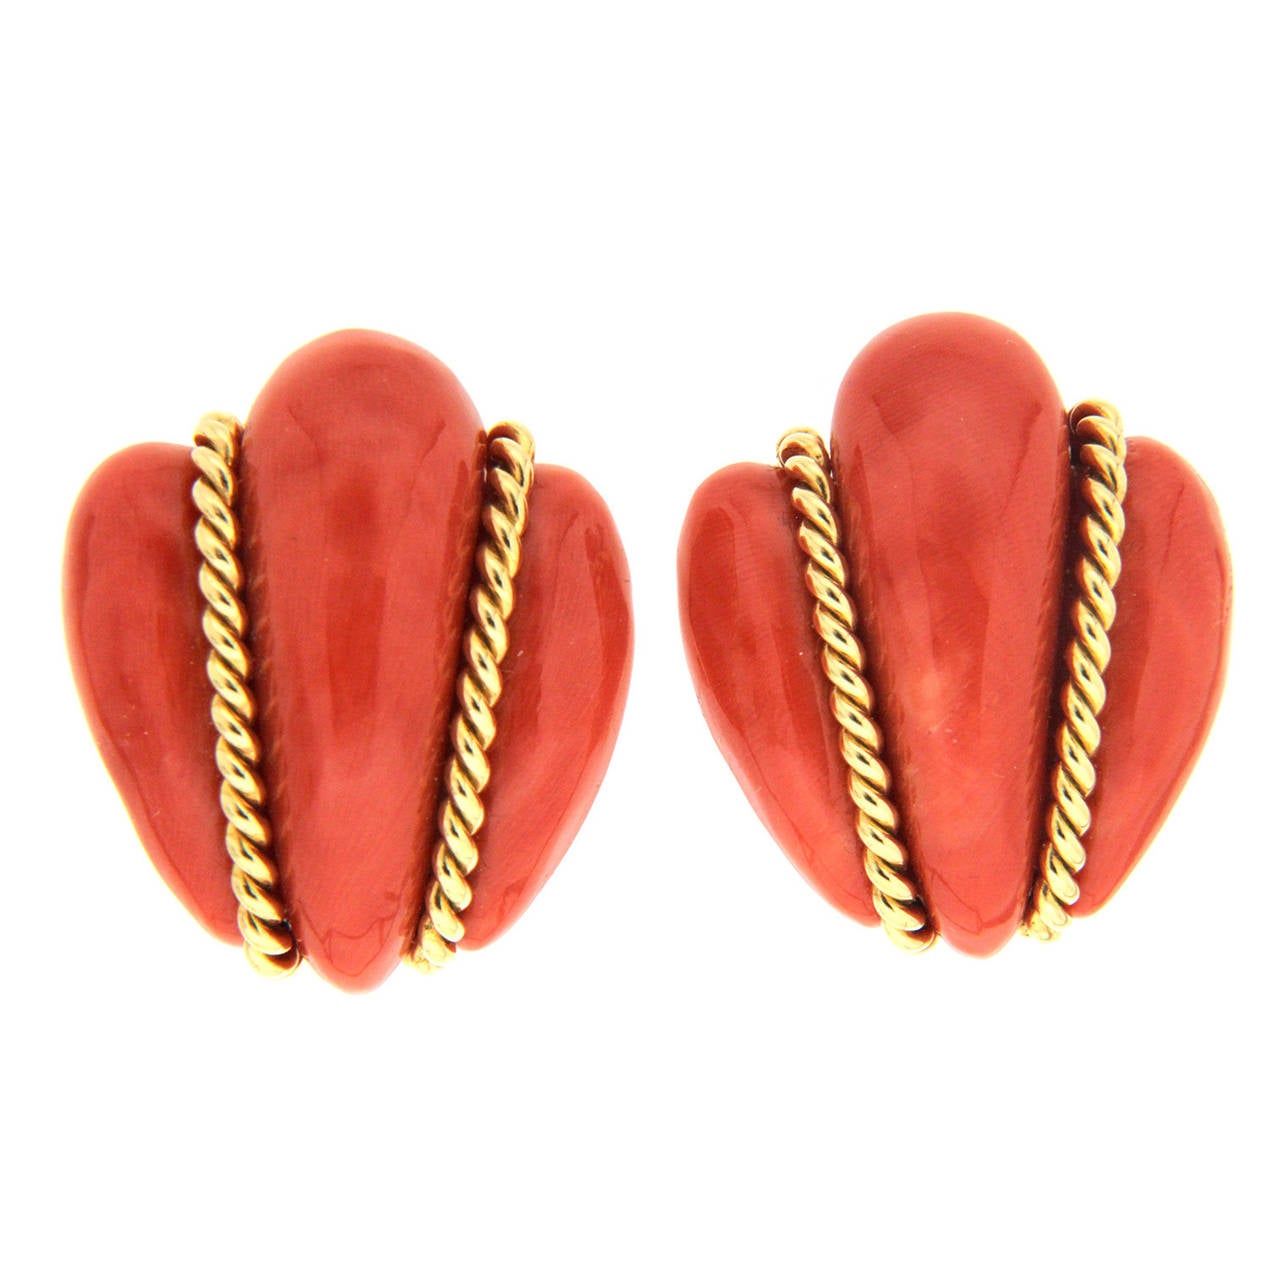 Coral Bee Earrings with Twisted Gold Wires